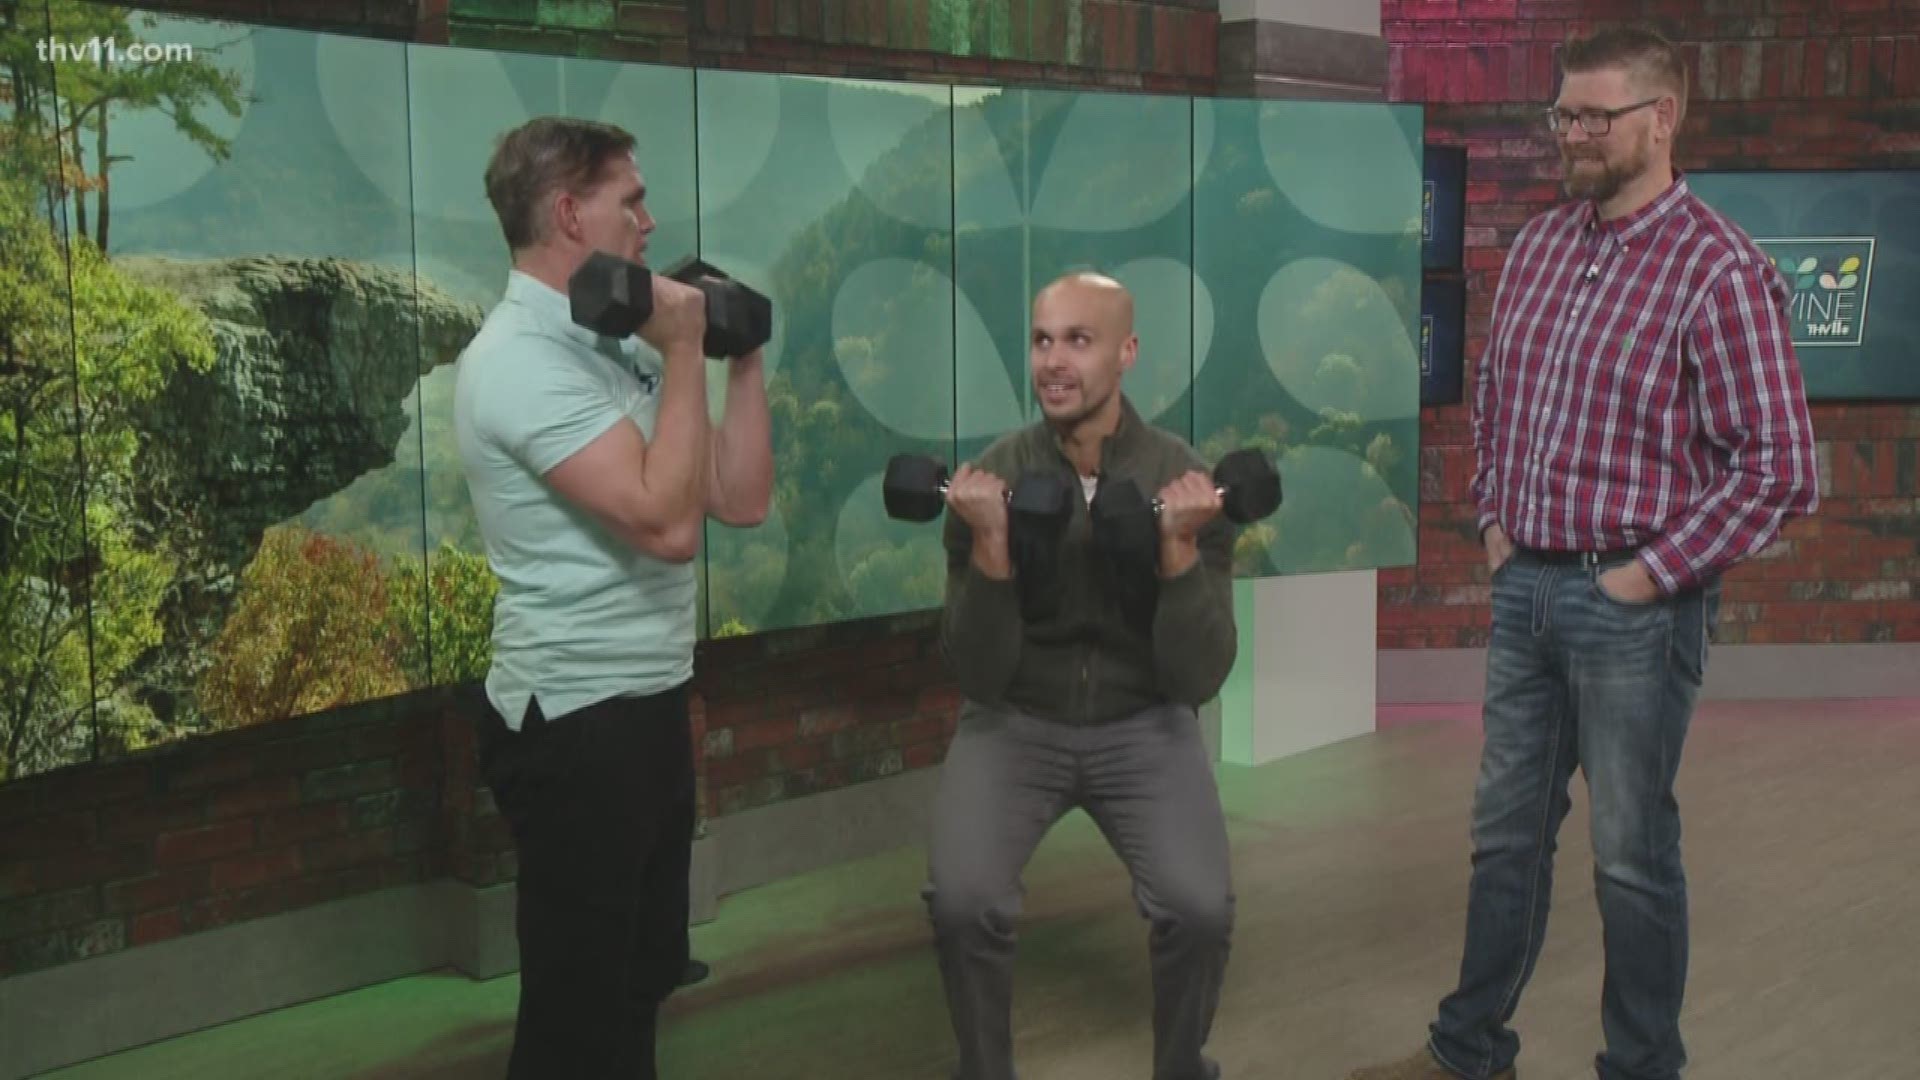 Get ready to break a sweat! Jeff McDaniel is here with his 'Body Builder Burnout' workout!